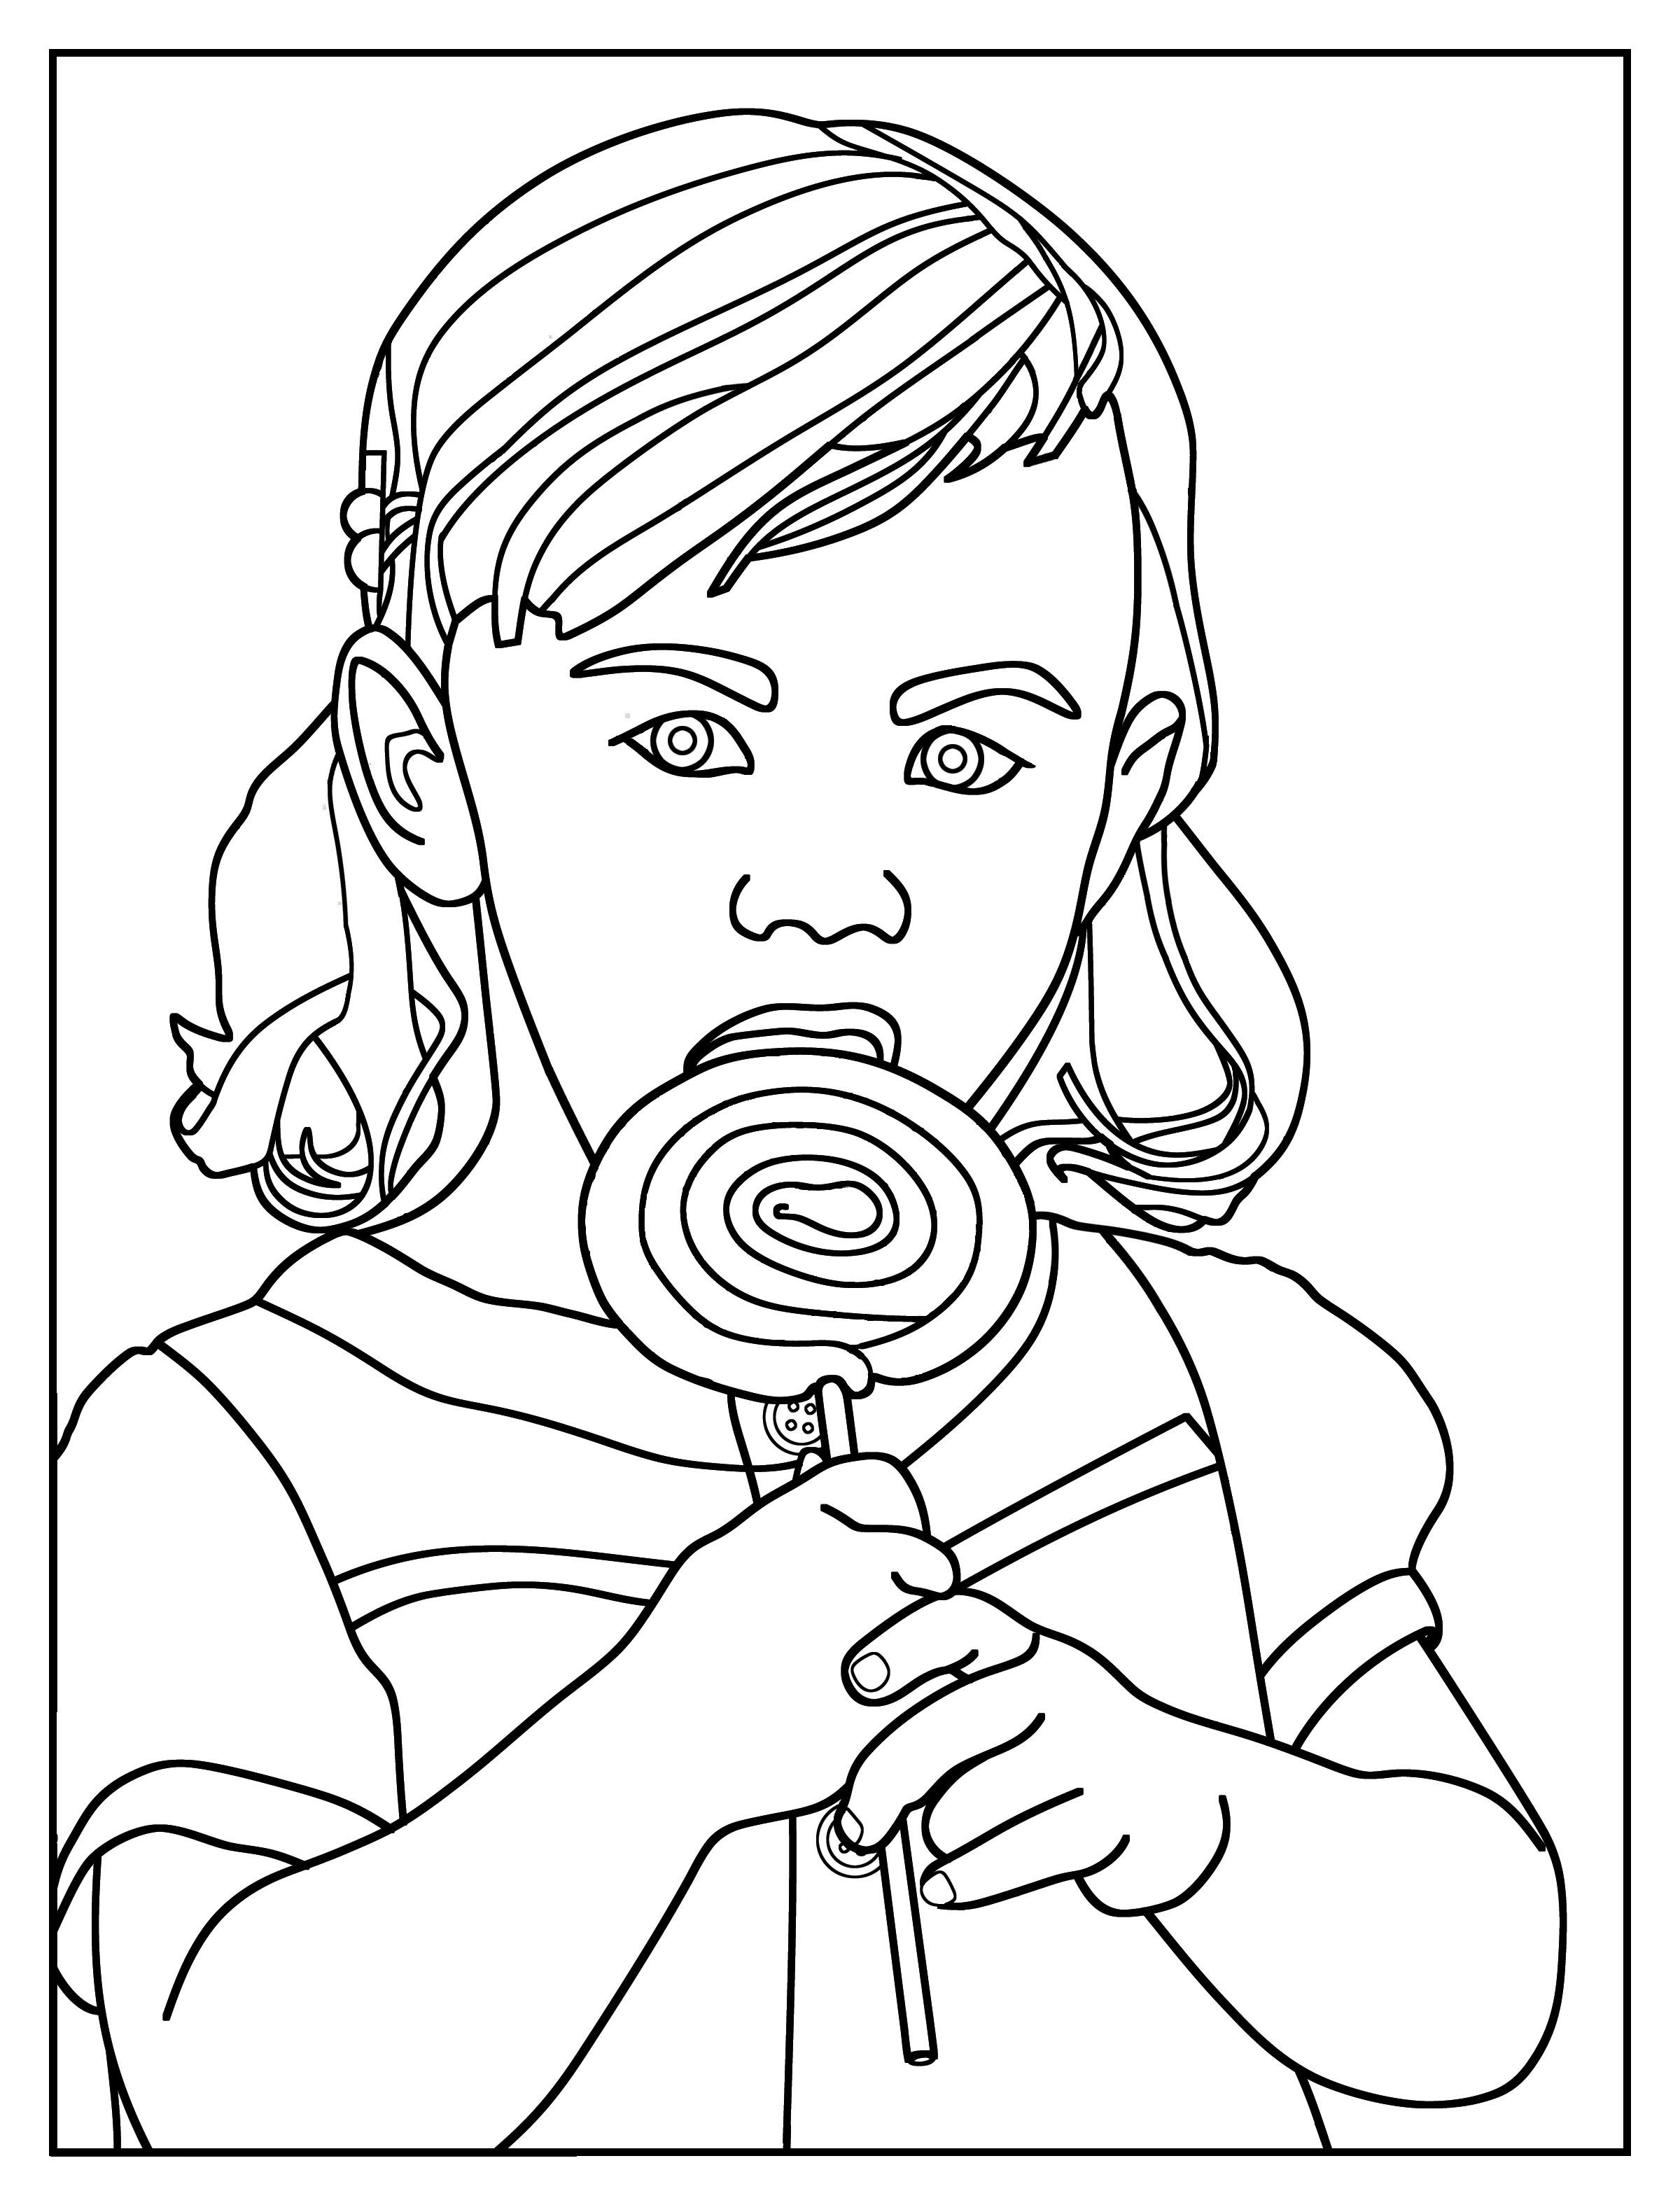 Lollipop Coloring Pages - Best Coloring Pages For Kids